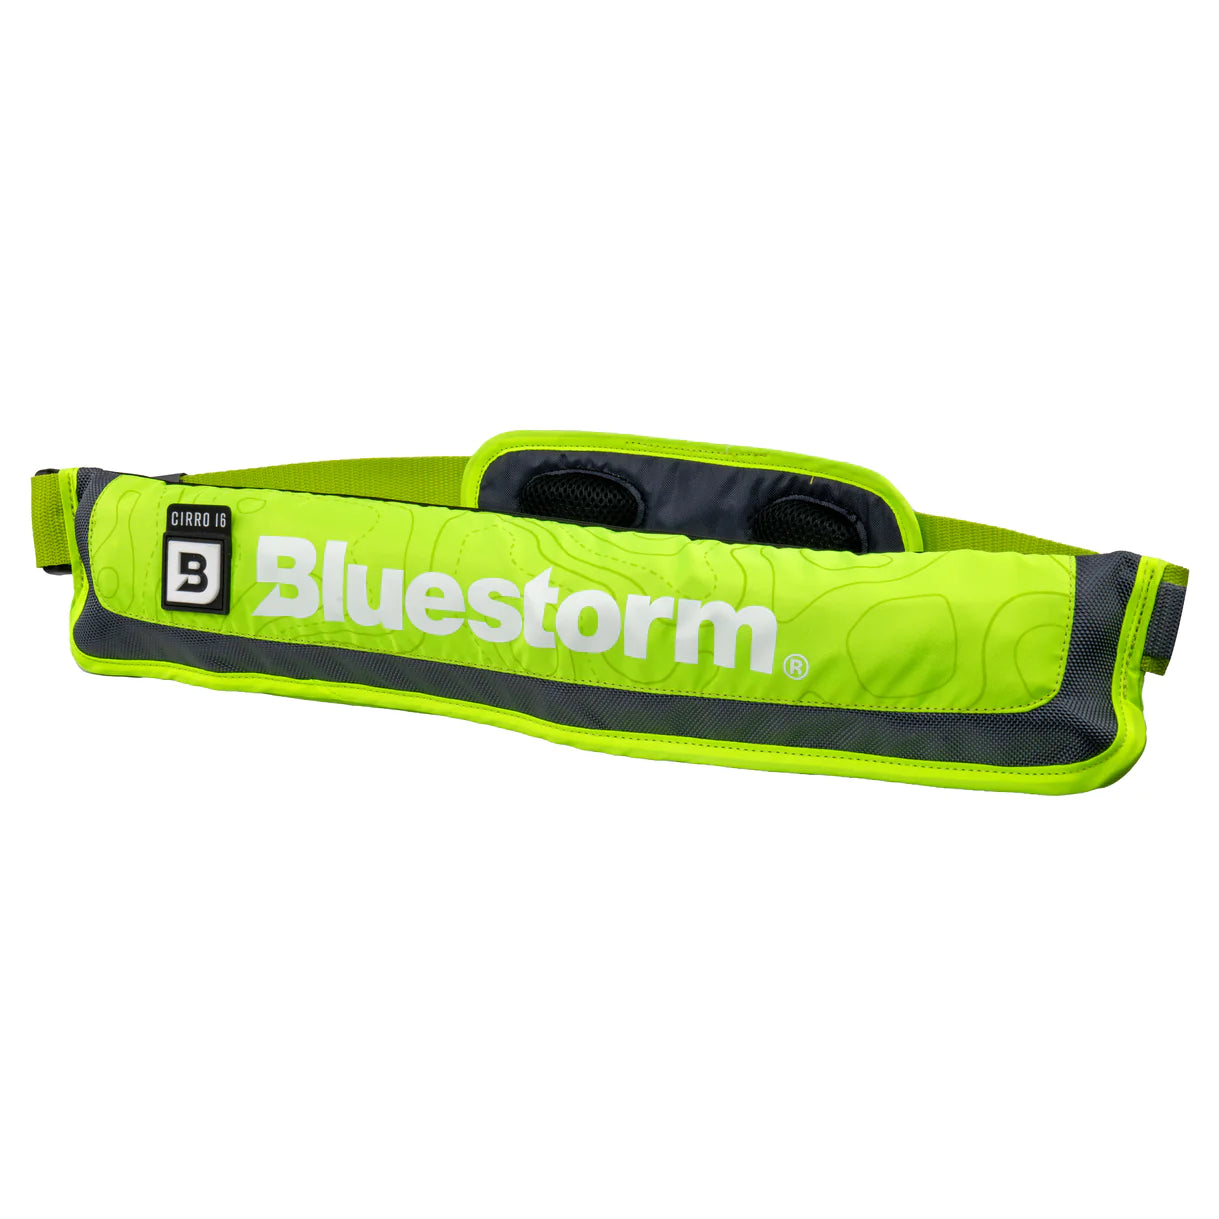 Bluestorm Cirro 16 Manual Inflatable Life Jacket - USCG Approved